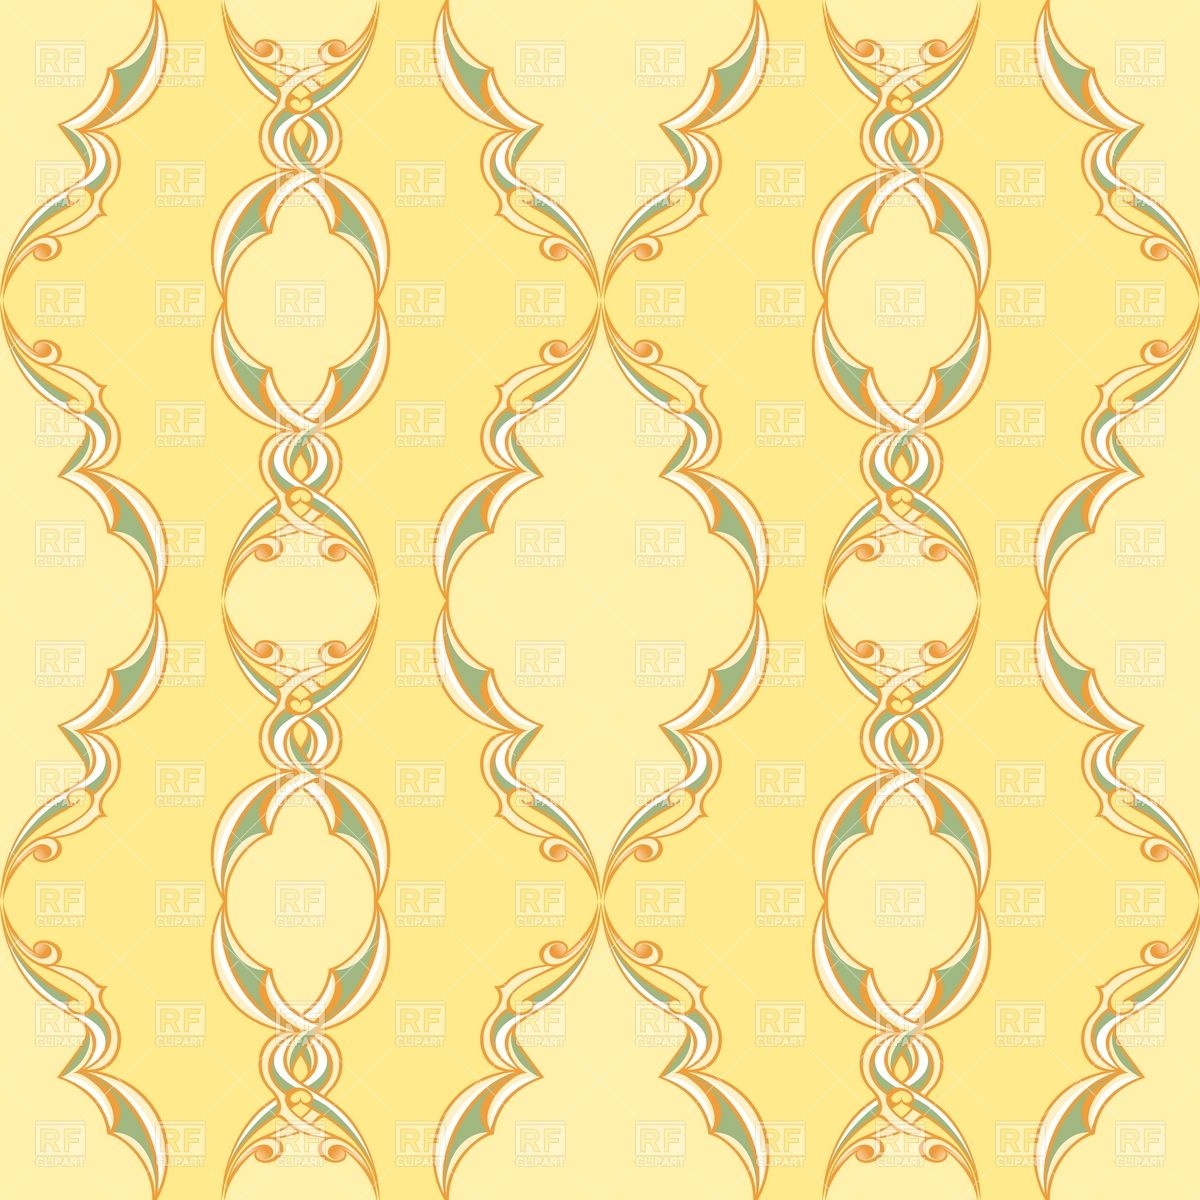 Vintage Wallpaper Pattern Download Royalty Free Vector Clipart  Eps